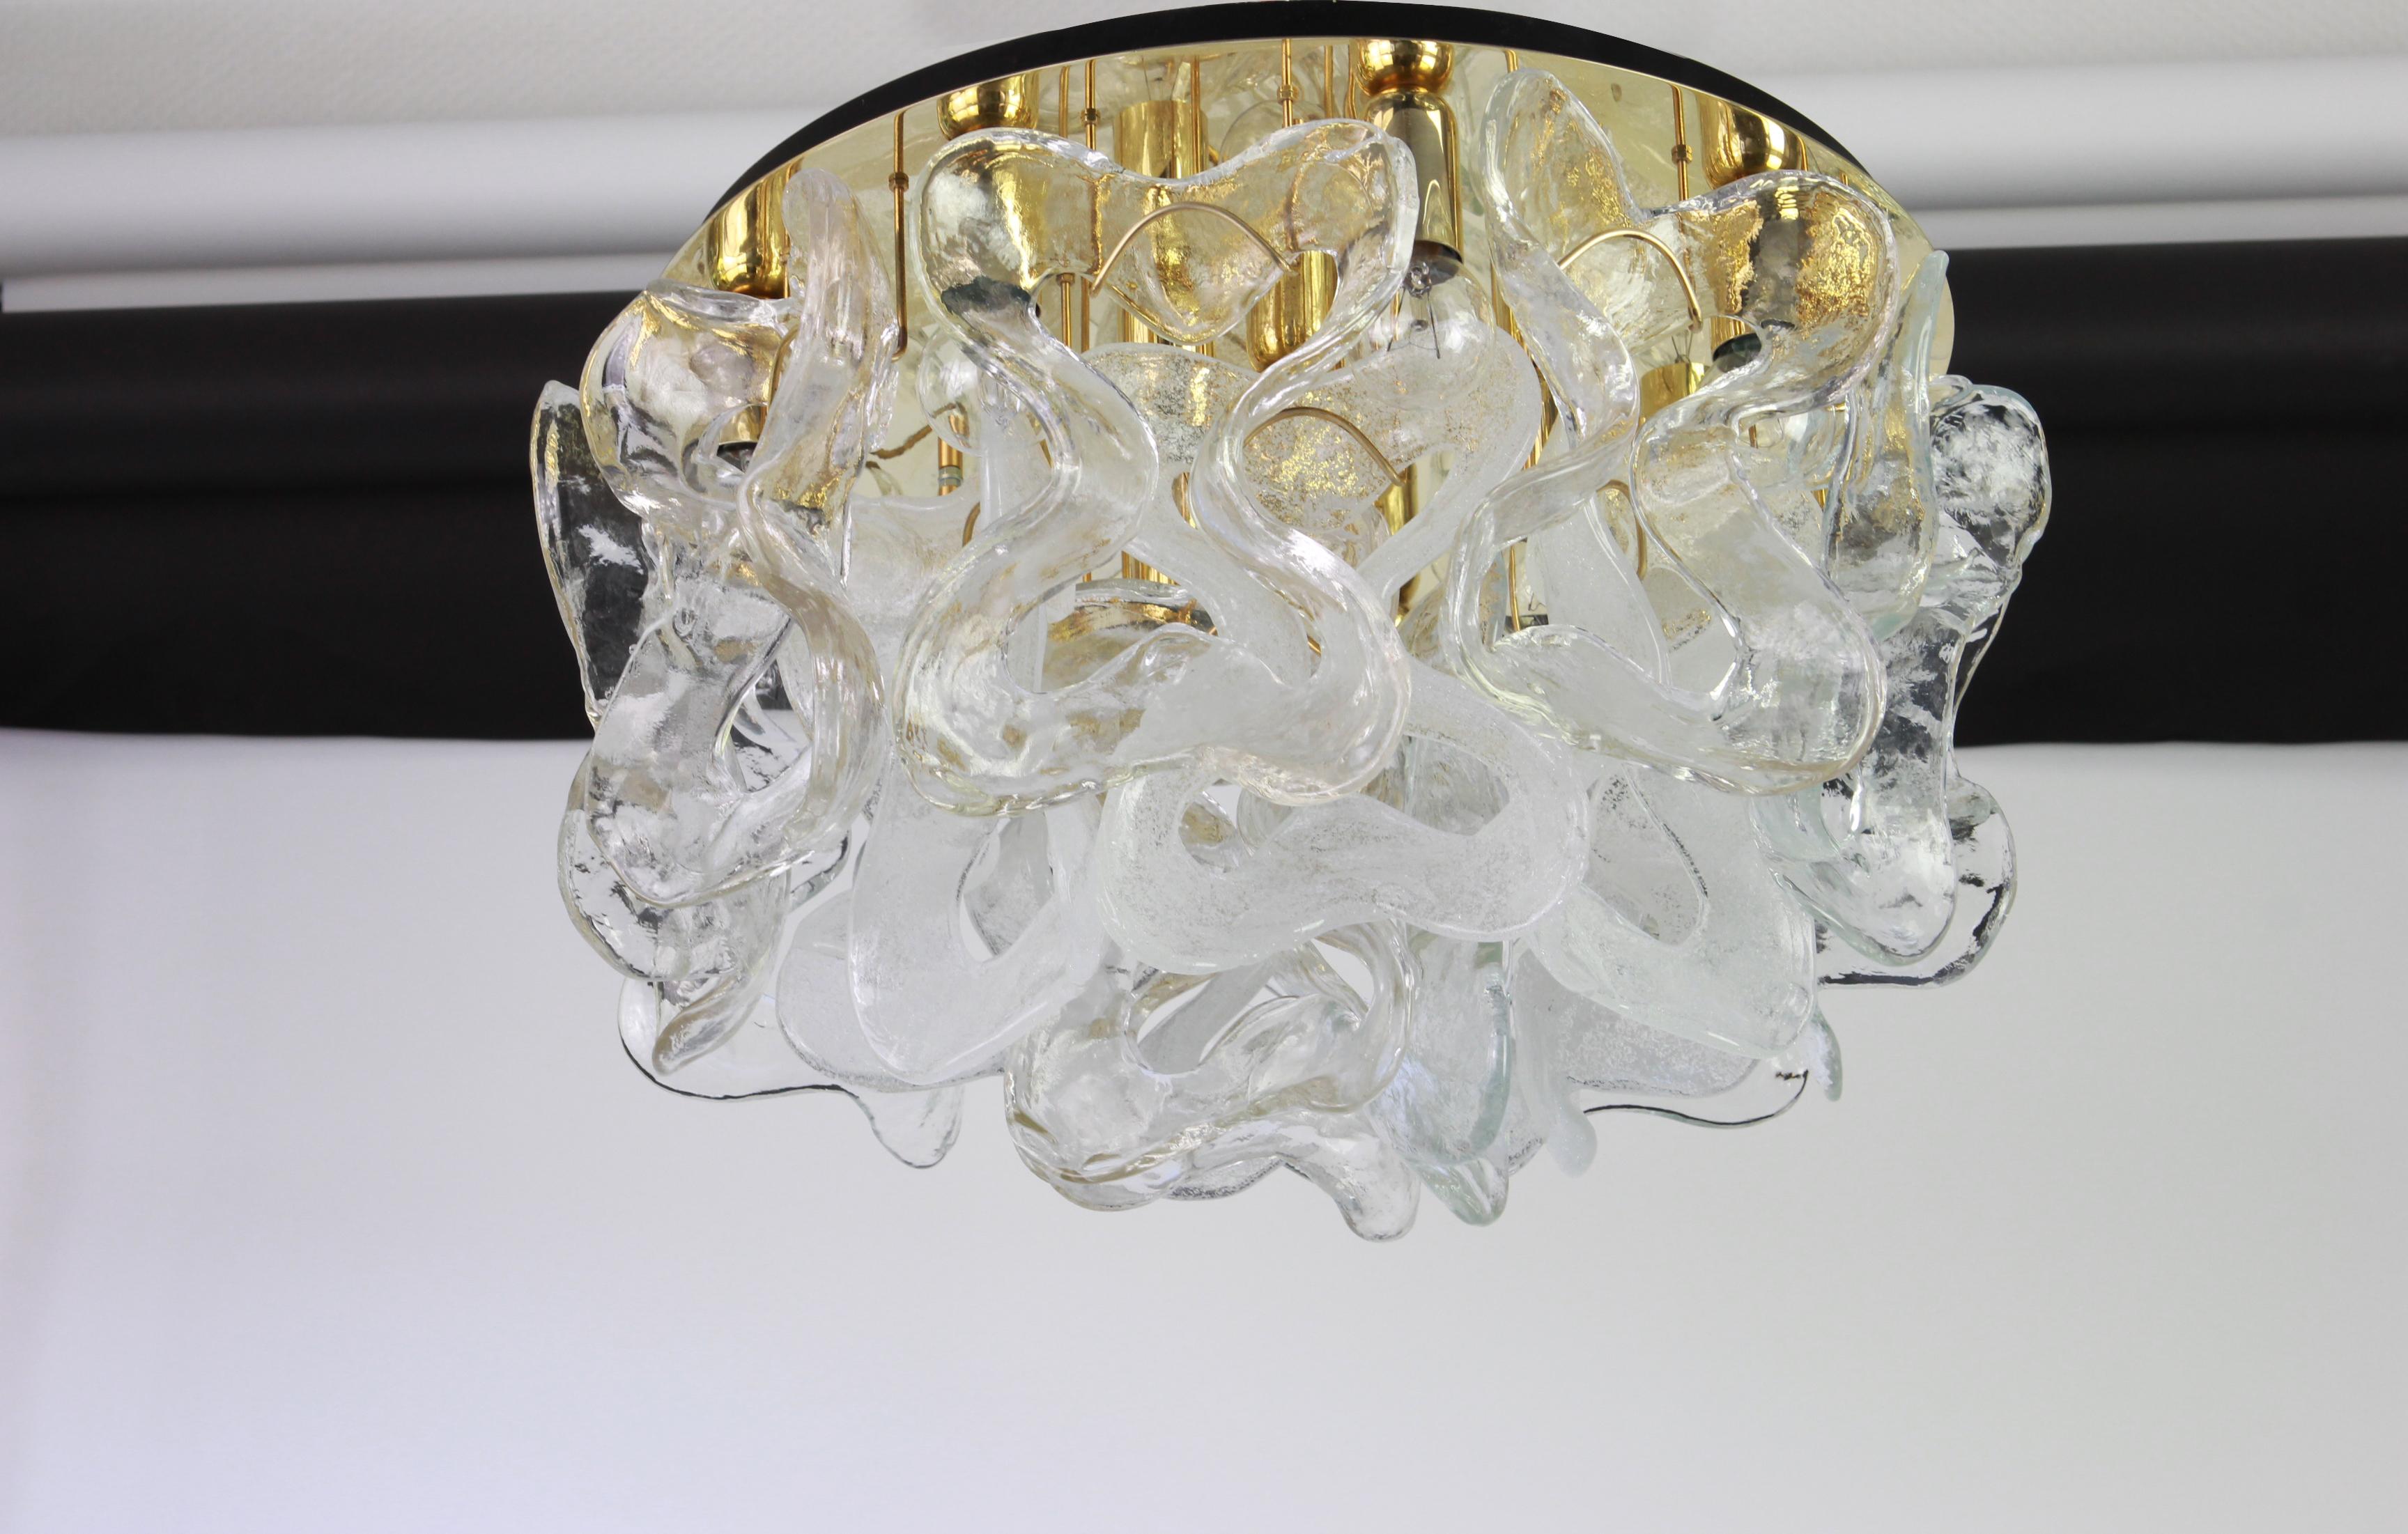 German Large Catena Ceiling Fixture with Murano Glasses by Kalmar, Austria, 1960s